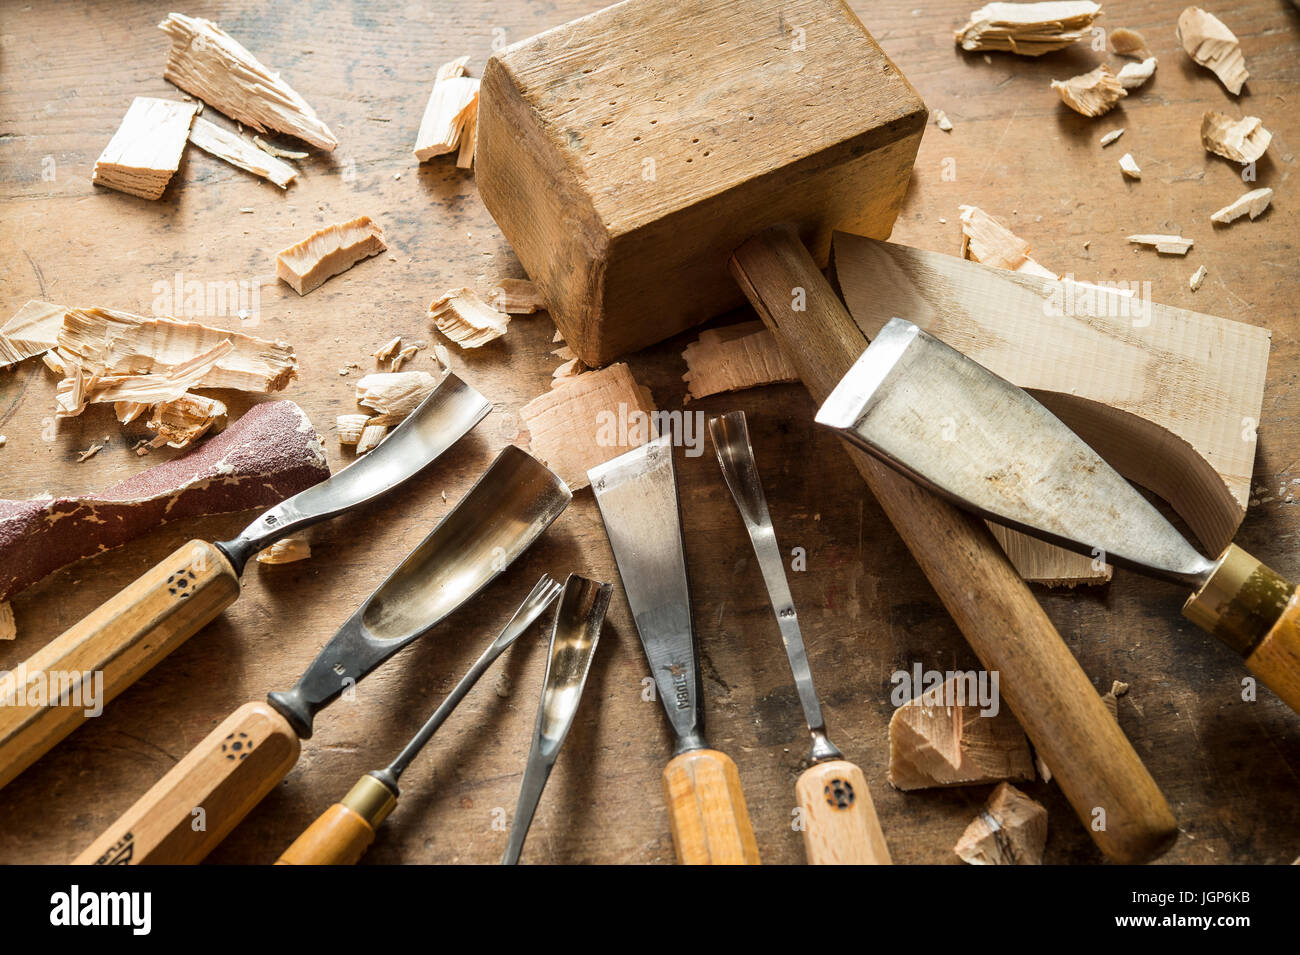 Various woodworking tools on a workbench, wooden mallet and wood carving knives, wooden mask carver, Bad Aussee, Styria, Austria Stock Photo